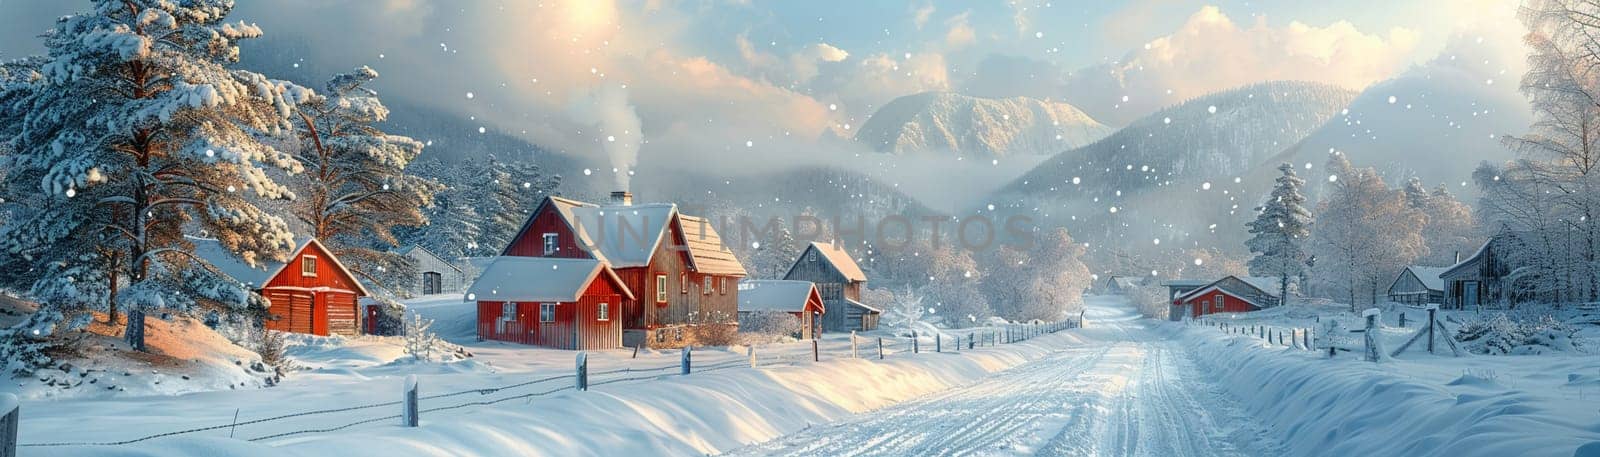 Peaceful snowfall in town created in a minimalist Scandinavian design style, emphasizing clean lines and simplicity.